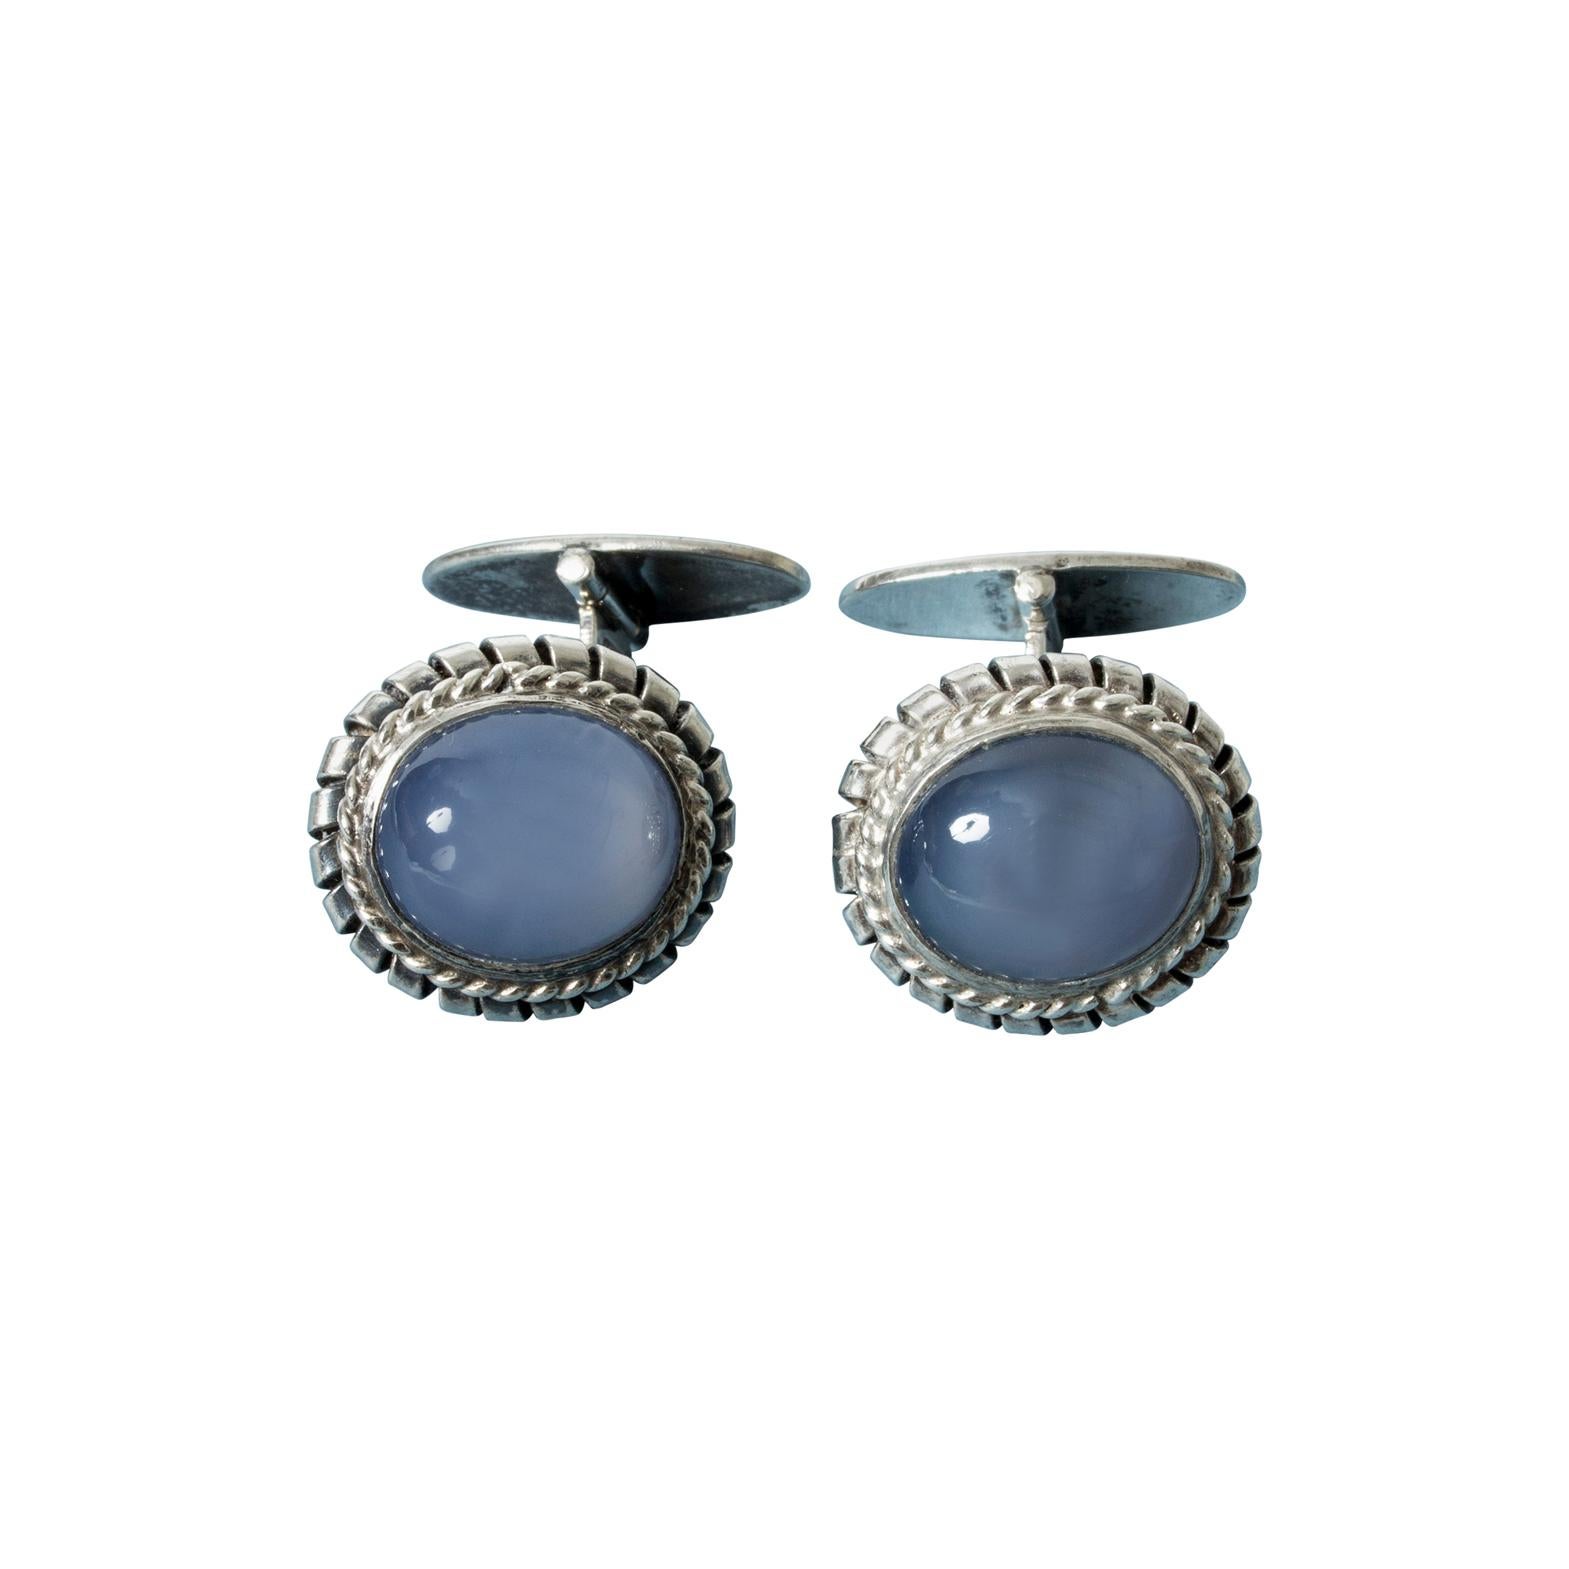 Silver and Chalcedony Cufflinks from Kaplans, Sweden, 1952